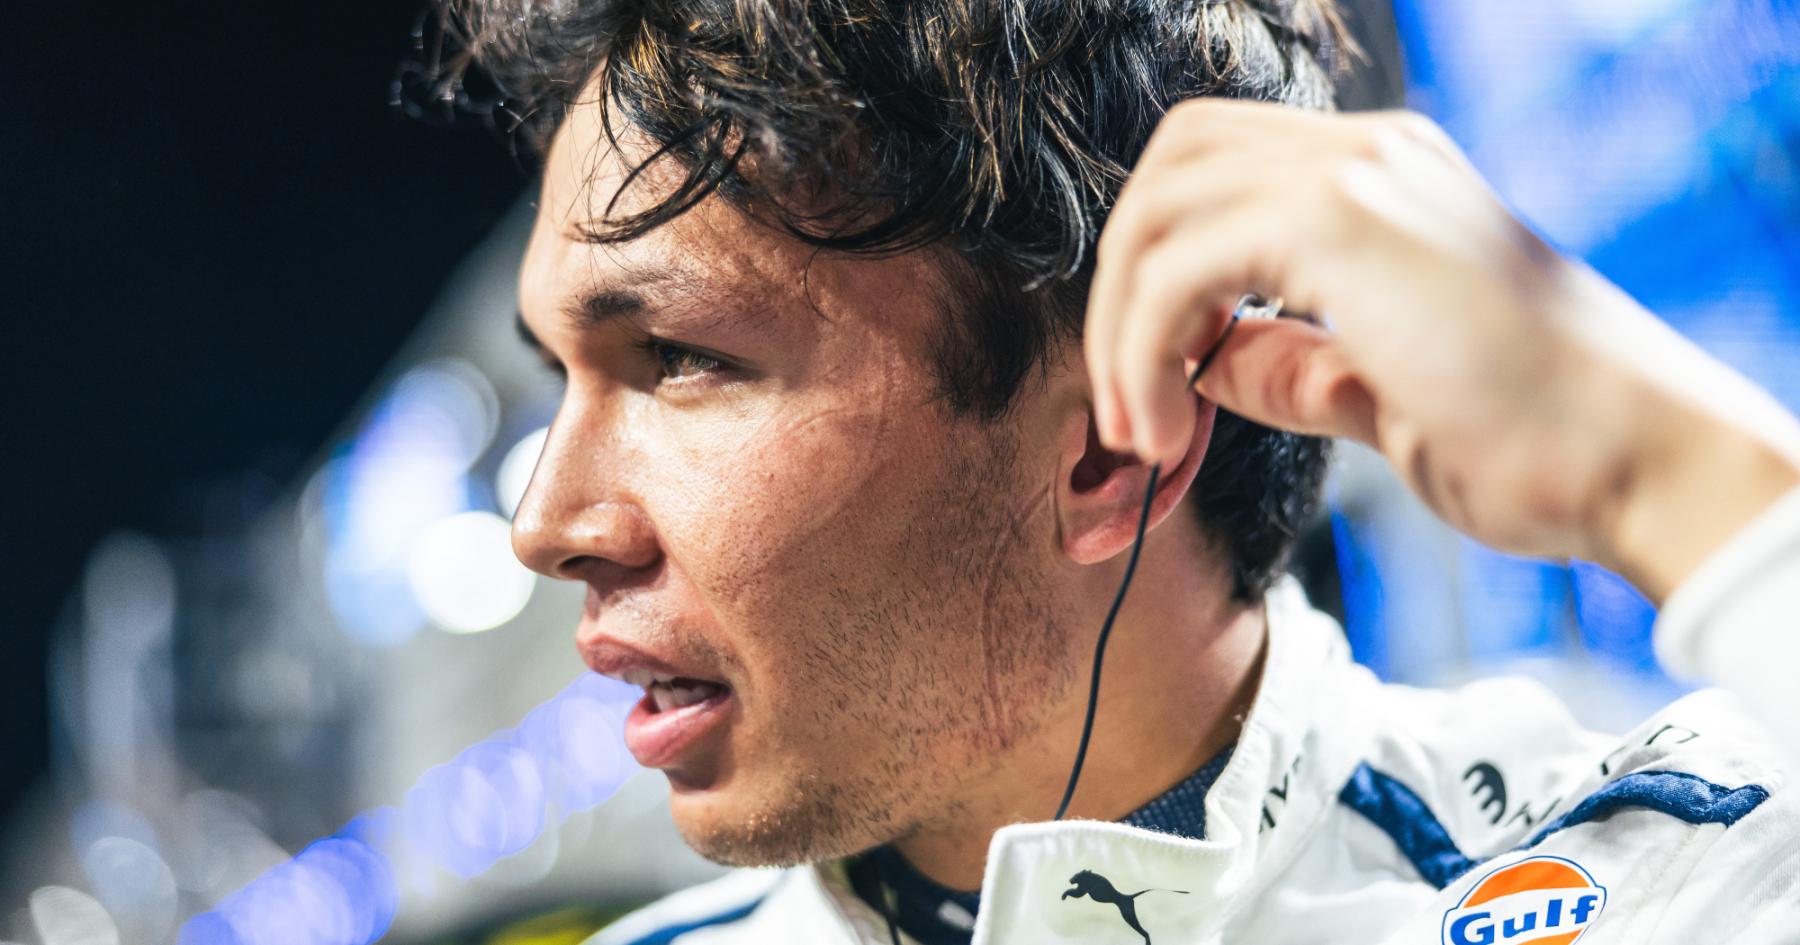 Albon's Bounce Back: Williams Provides Encouraging Update After Intense Practice Crash